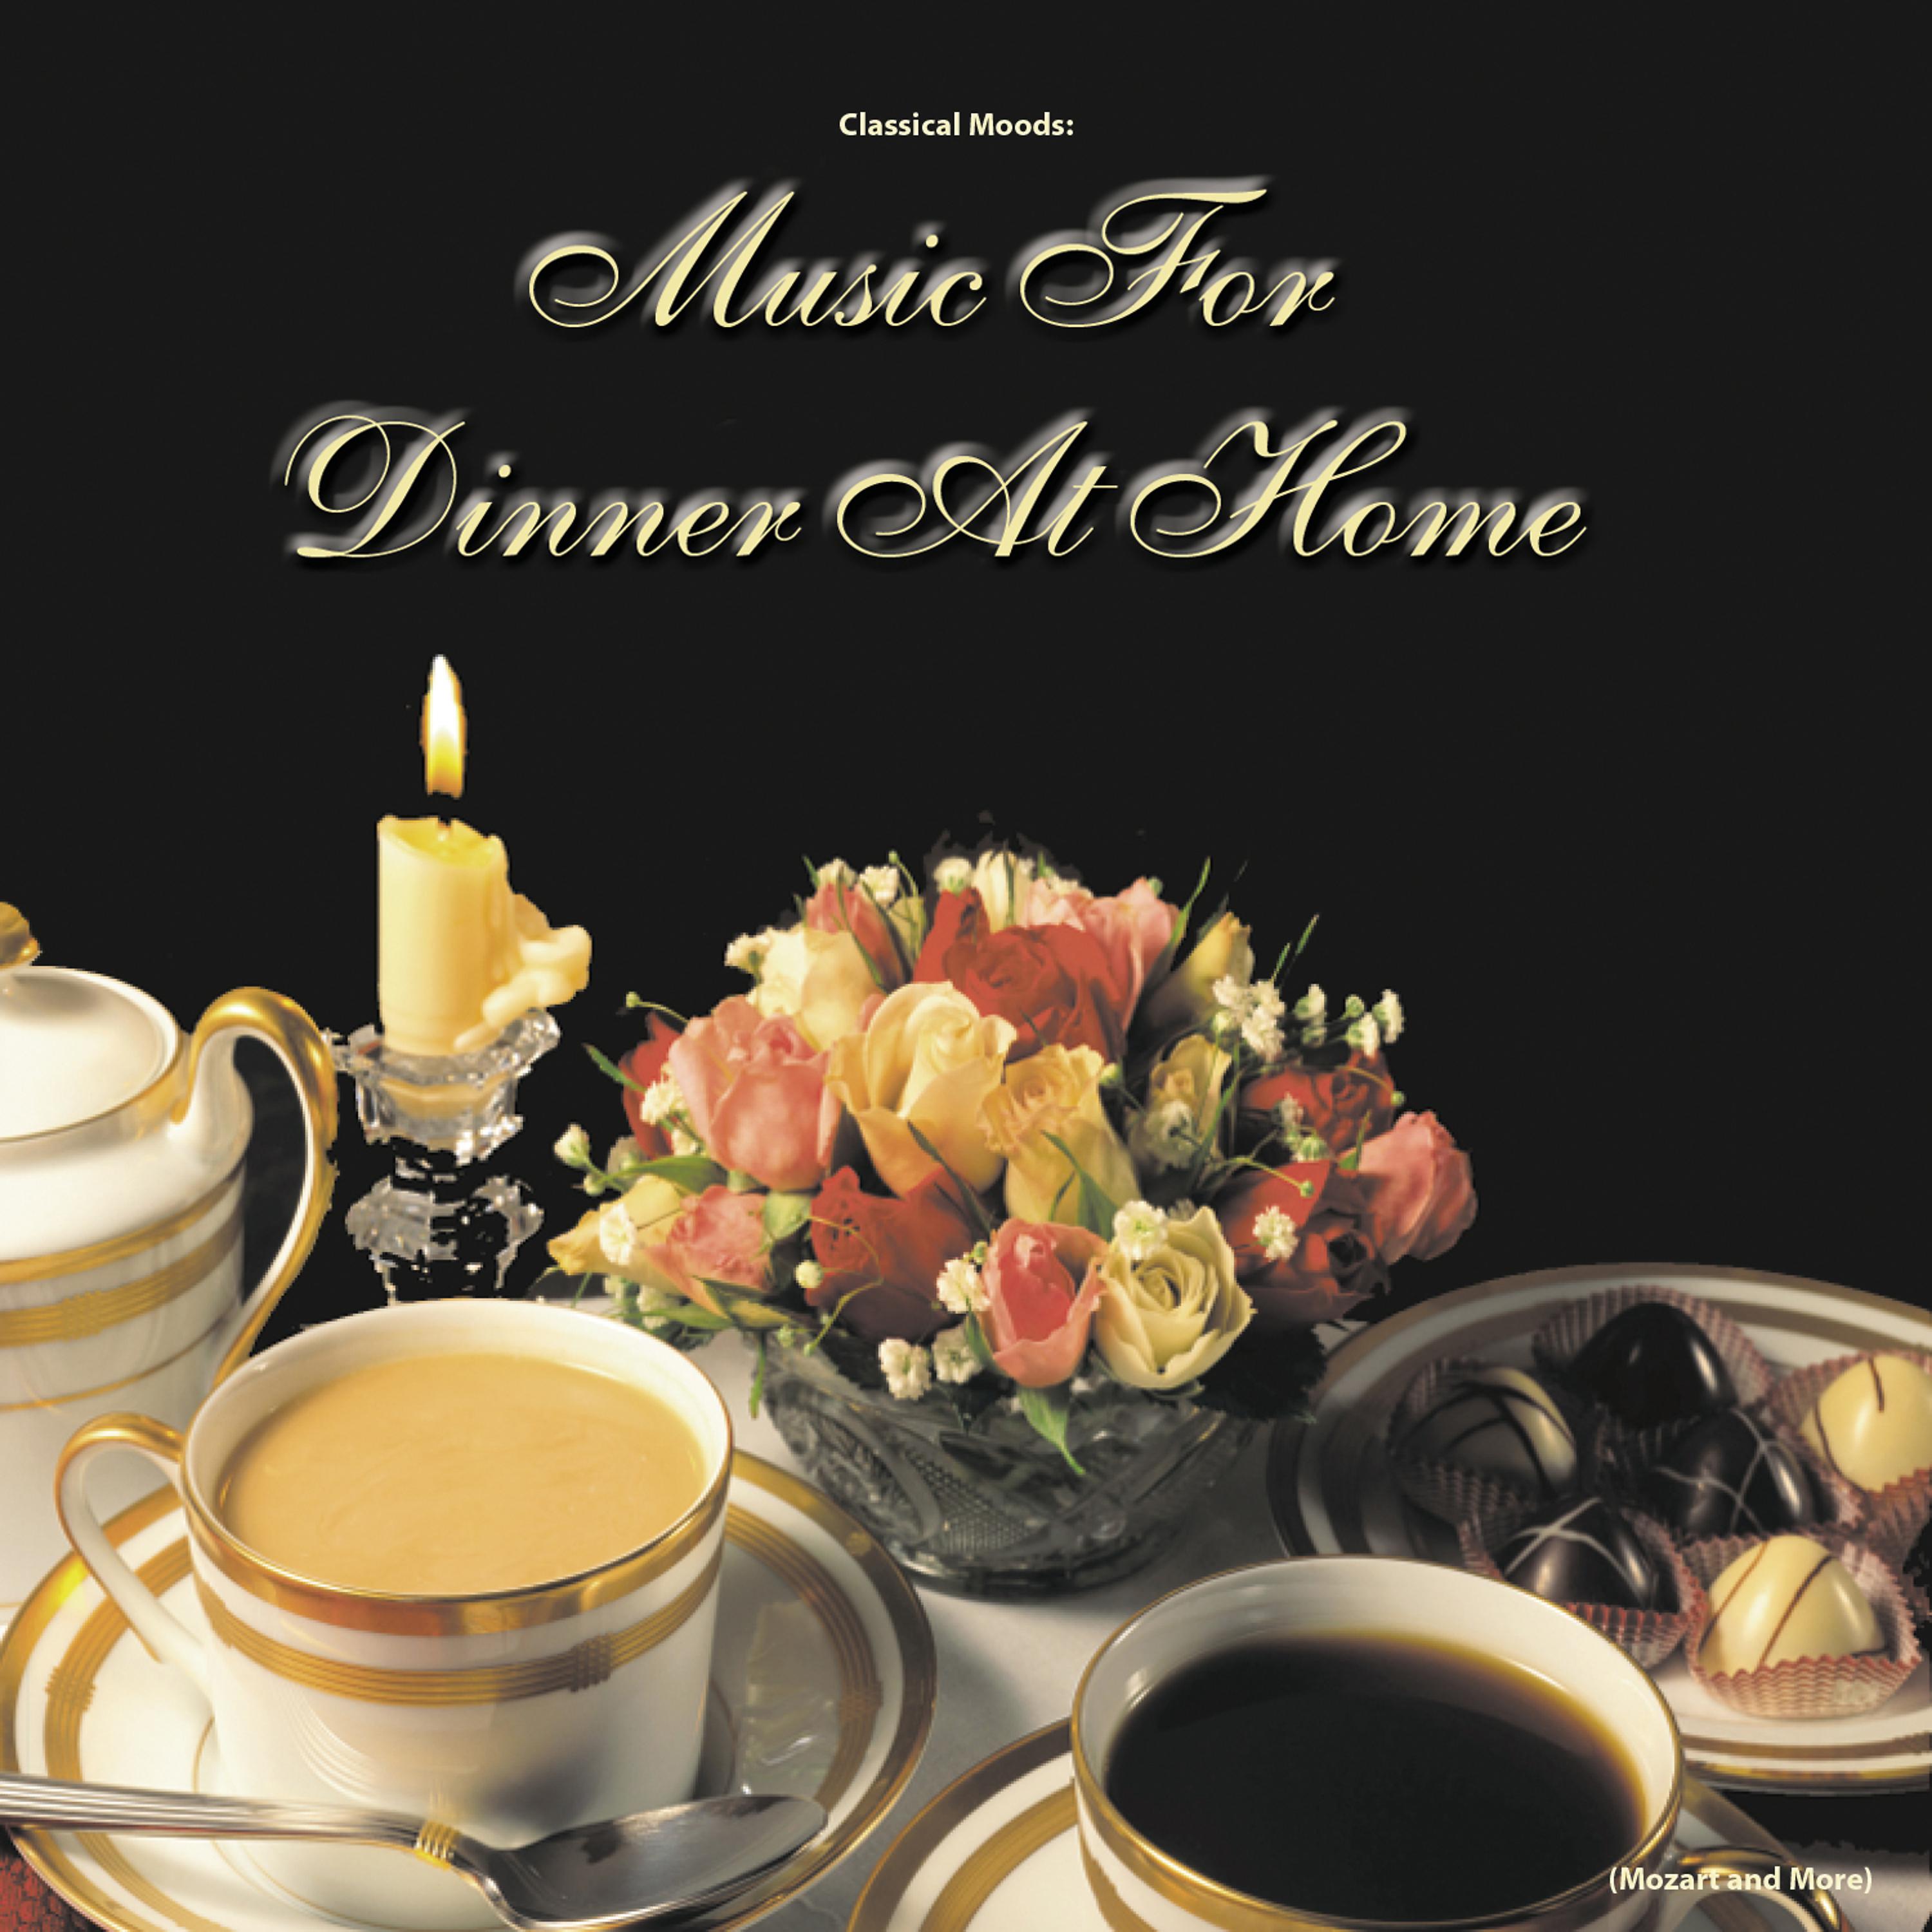 Постер альбома Classical Moods: Music for Dinner At Home (Mozart and More)